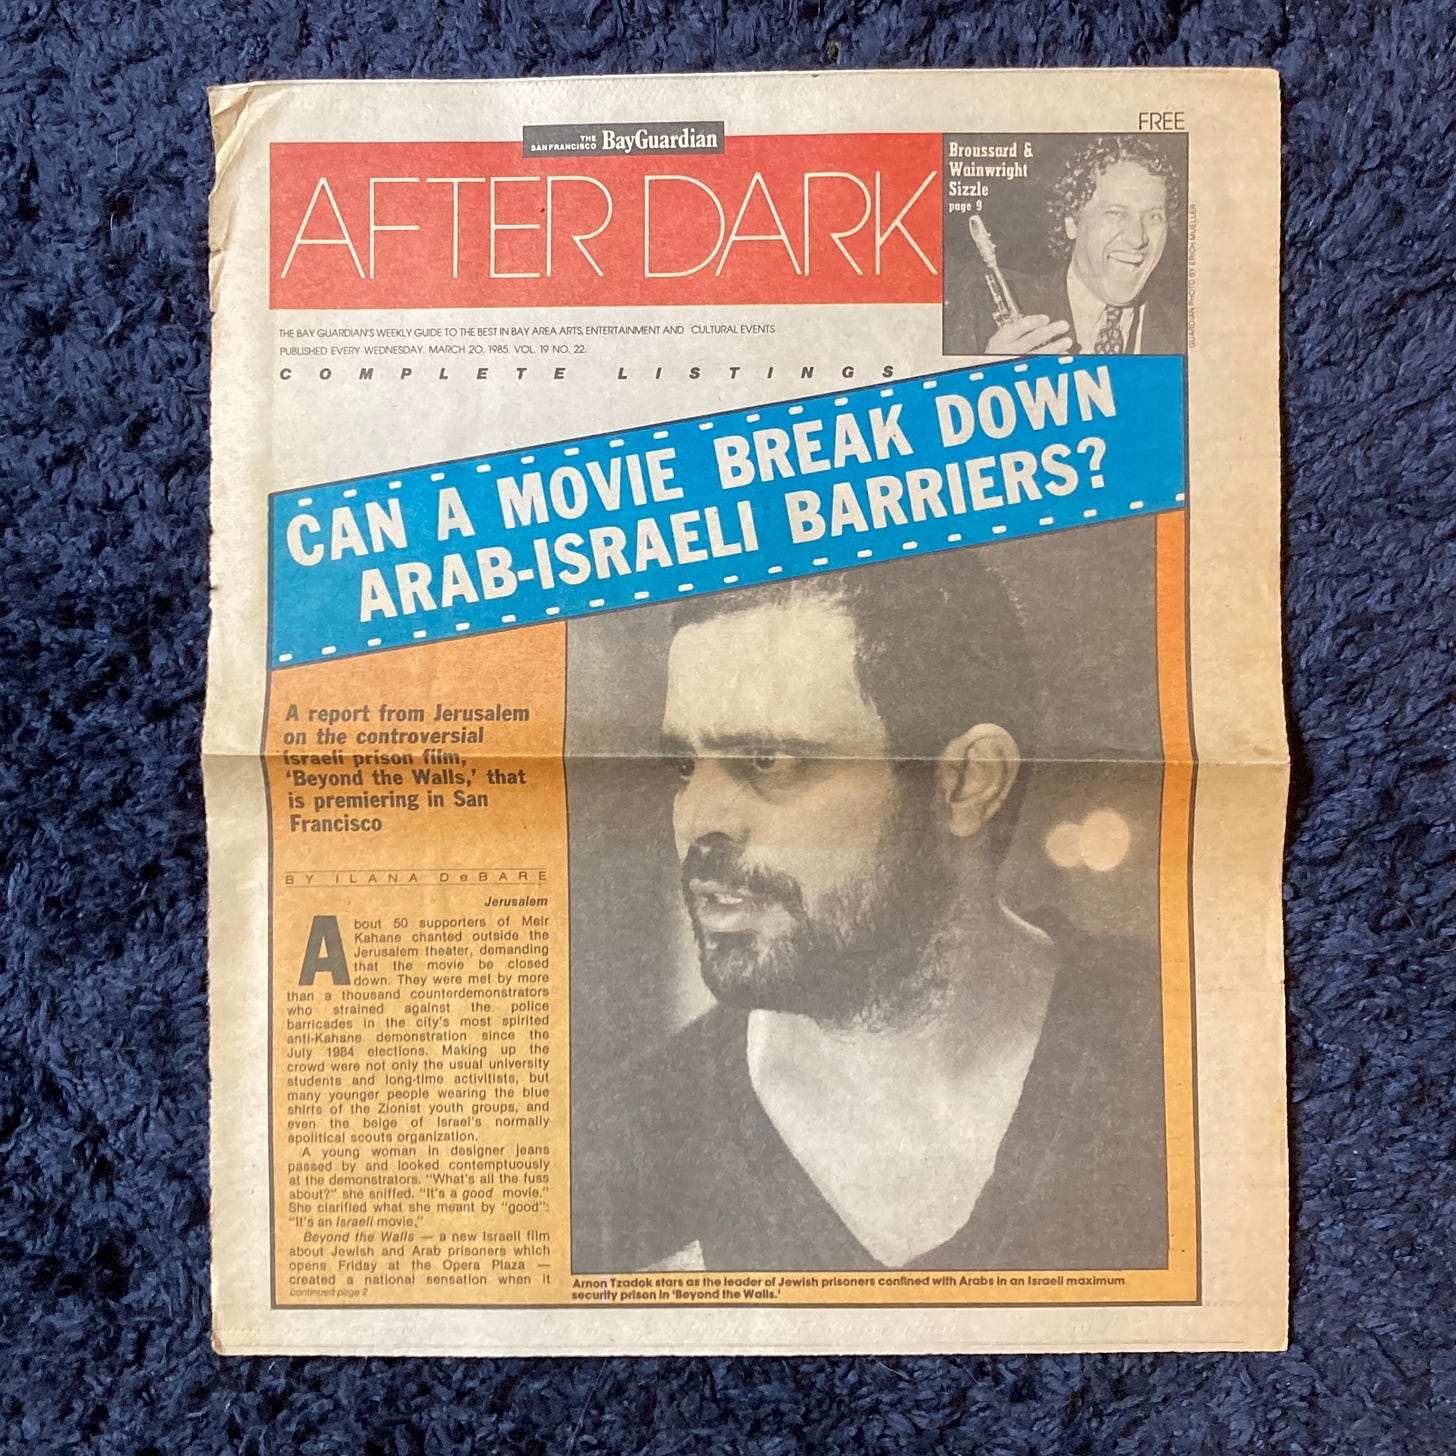 Page from the Bay Guardian newsweekly with headline saying "Can a movie break down Arab-Israeli barriers" and a photo fromn the movie Beyond the Walls